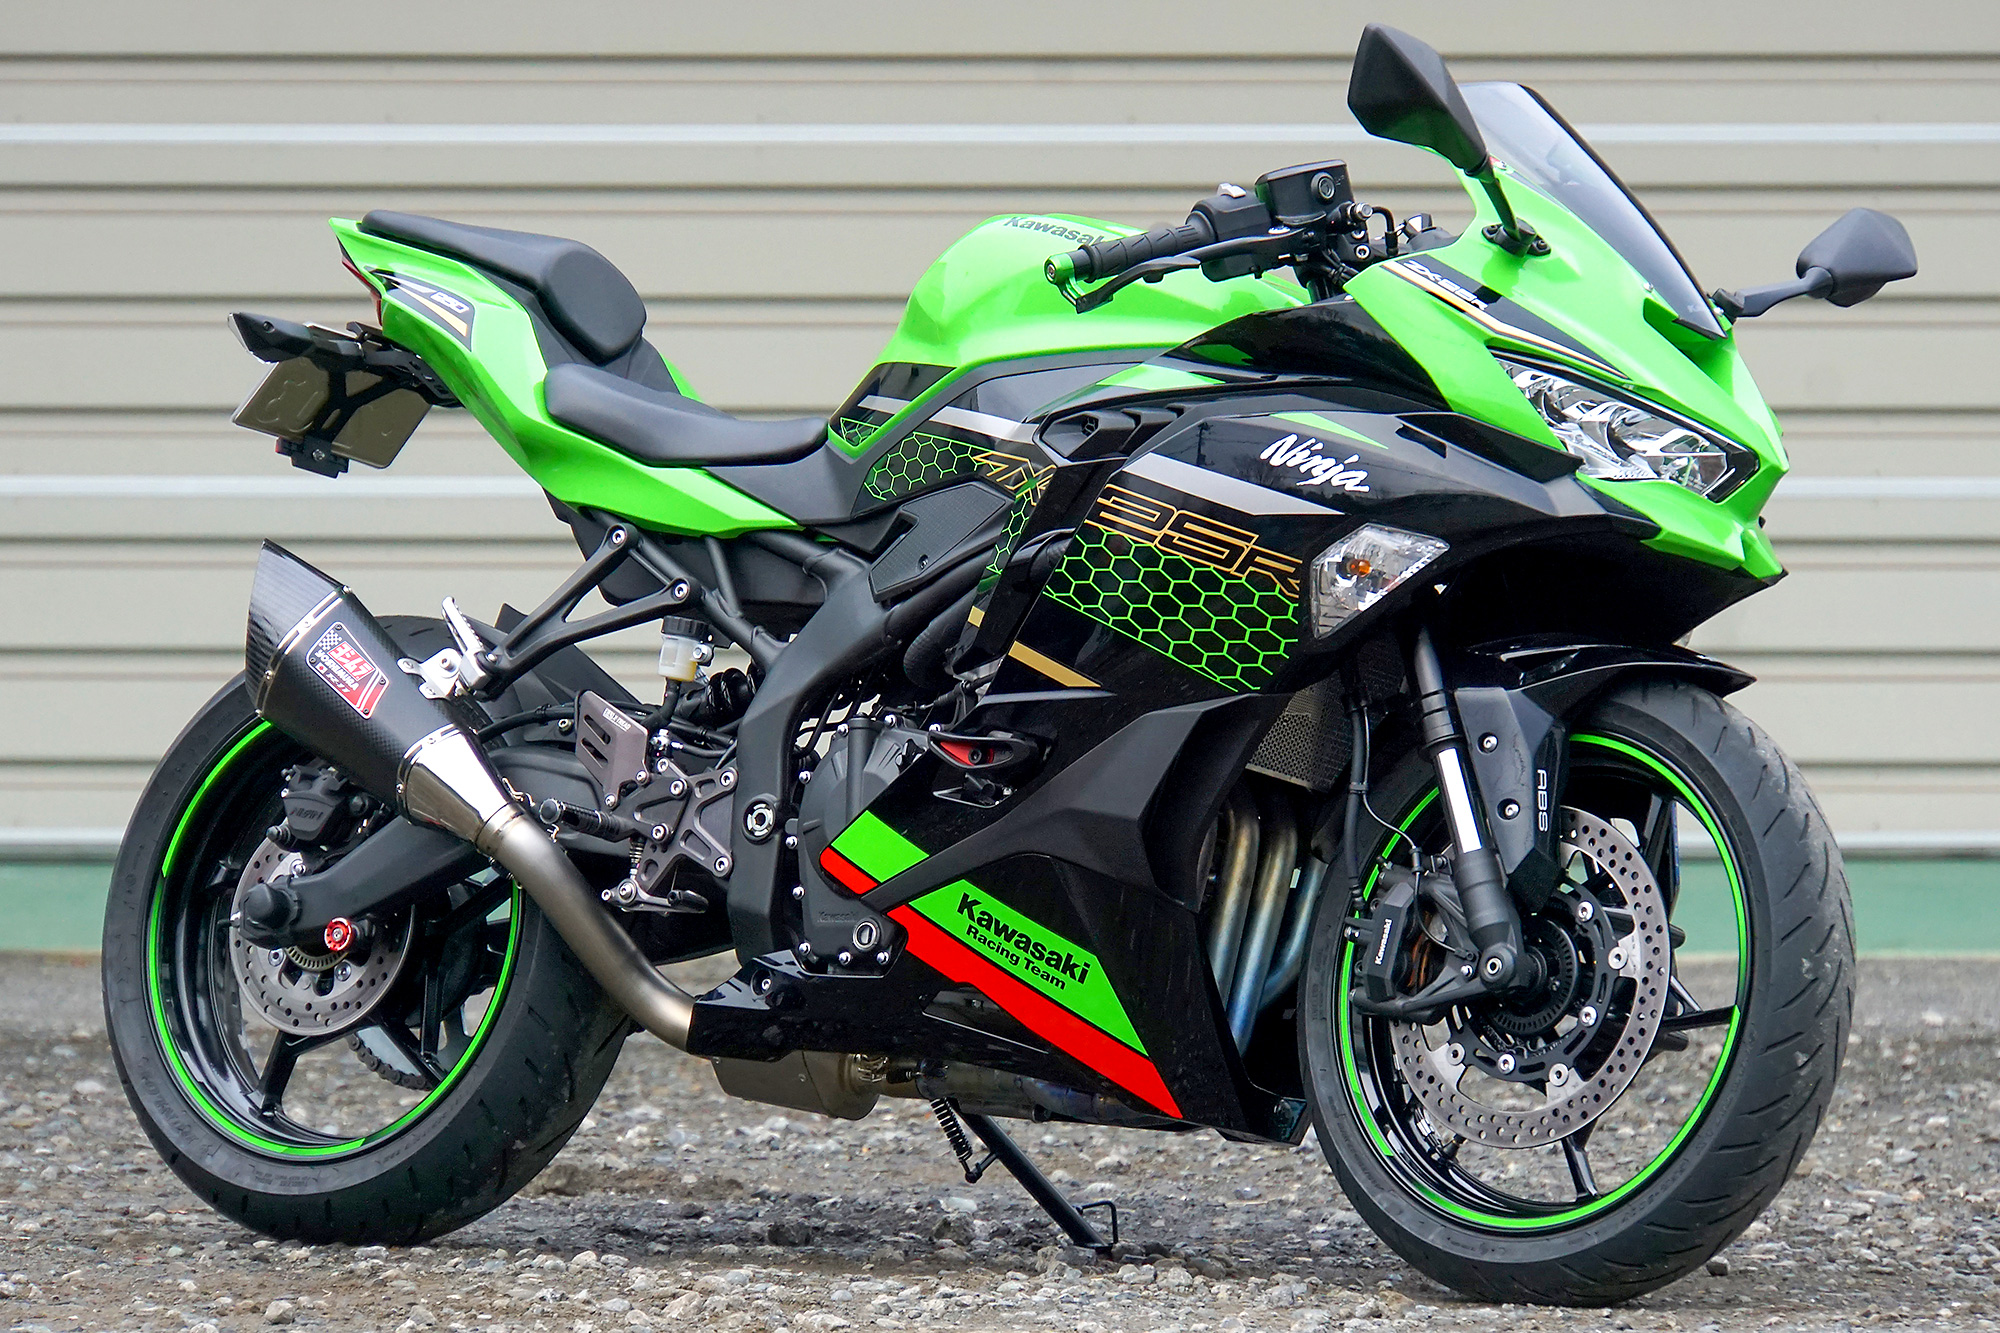 SALE／83%OFF】 ZX25R ビートナサートマフラー